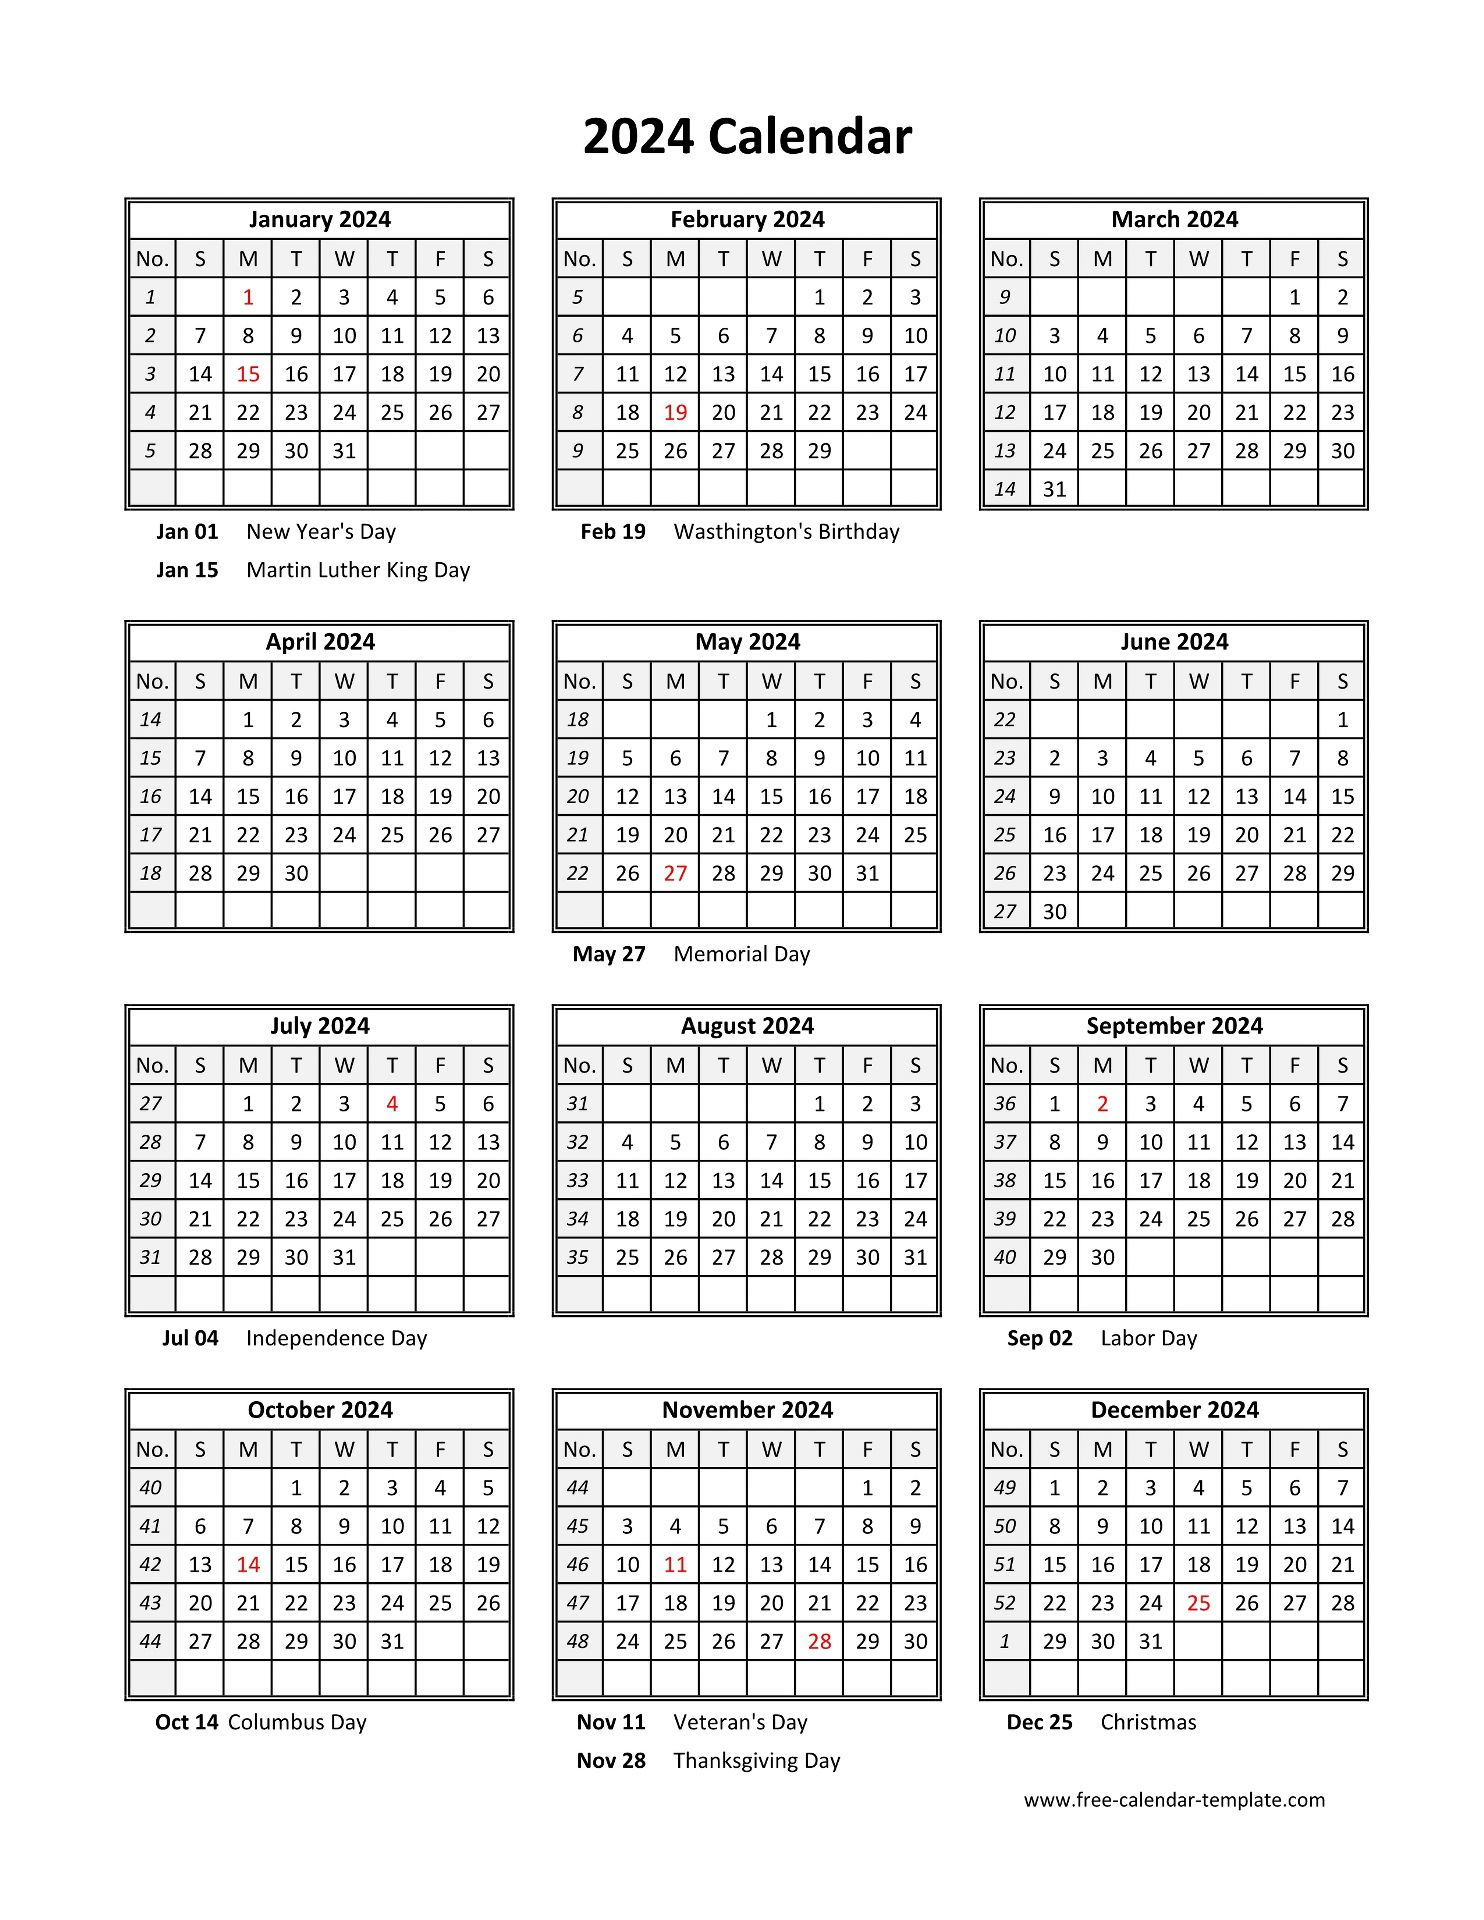 Yearly Printable Calendar 2024 With Holidays | Free-Calendar | Free Printable Calendar 2024 Yearly